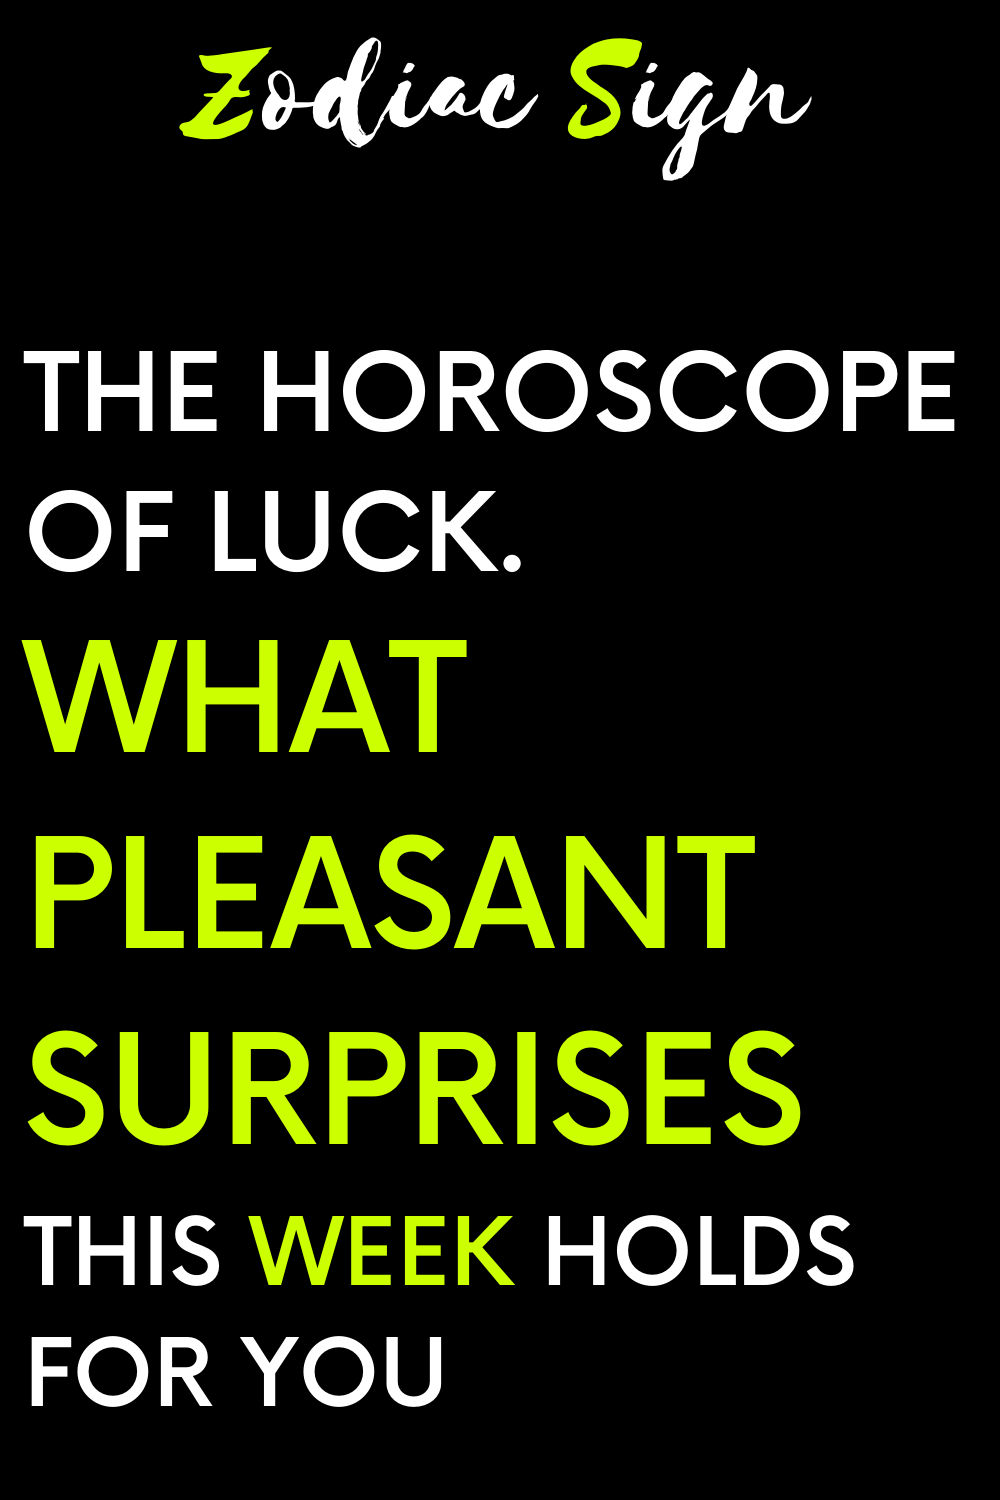 The horoscope of luck. What pleasant surprises this week holds for you